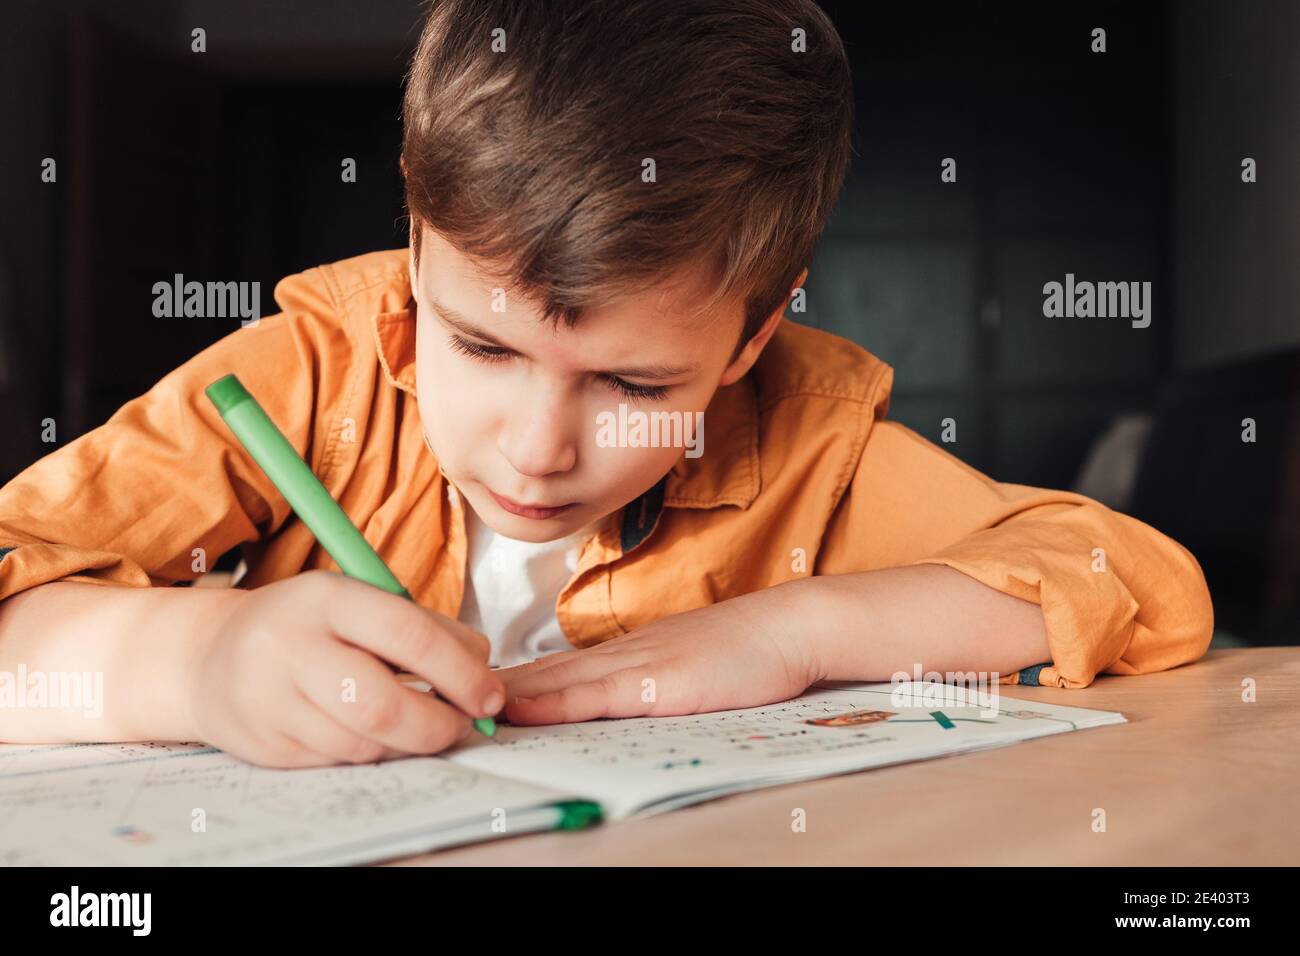 Cute 7 years old child doing his homework sitting by desk. Boy writing in notebook. Stock Photo